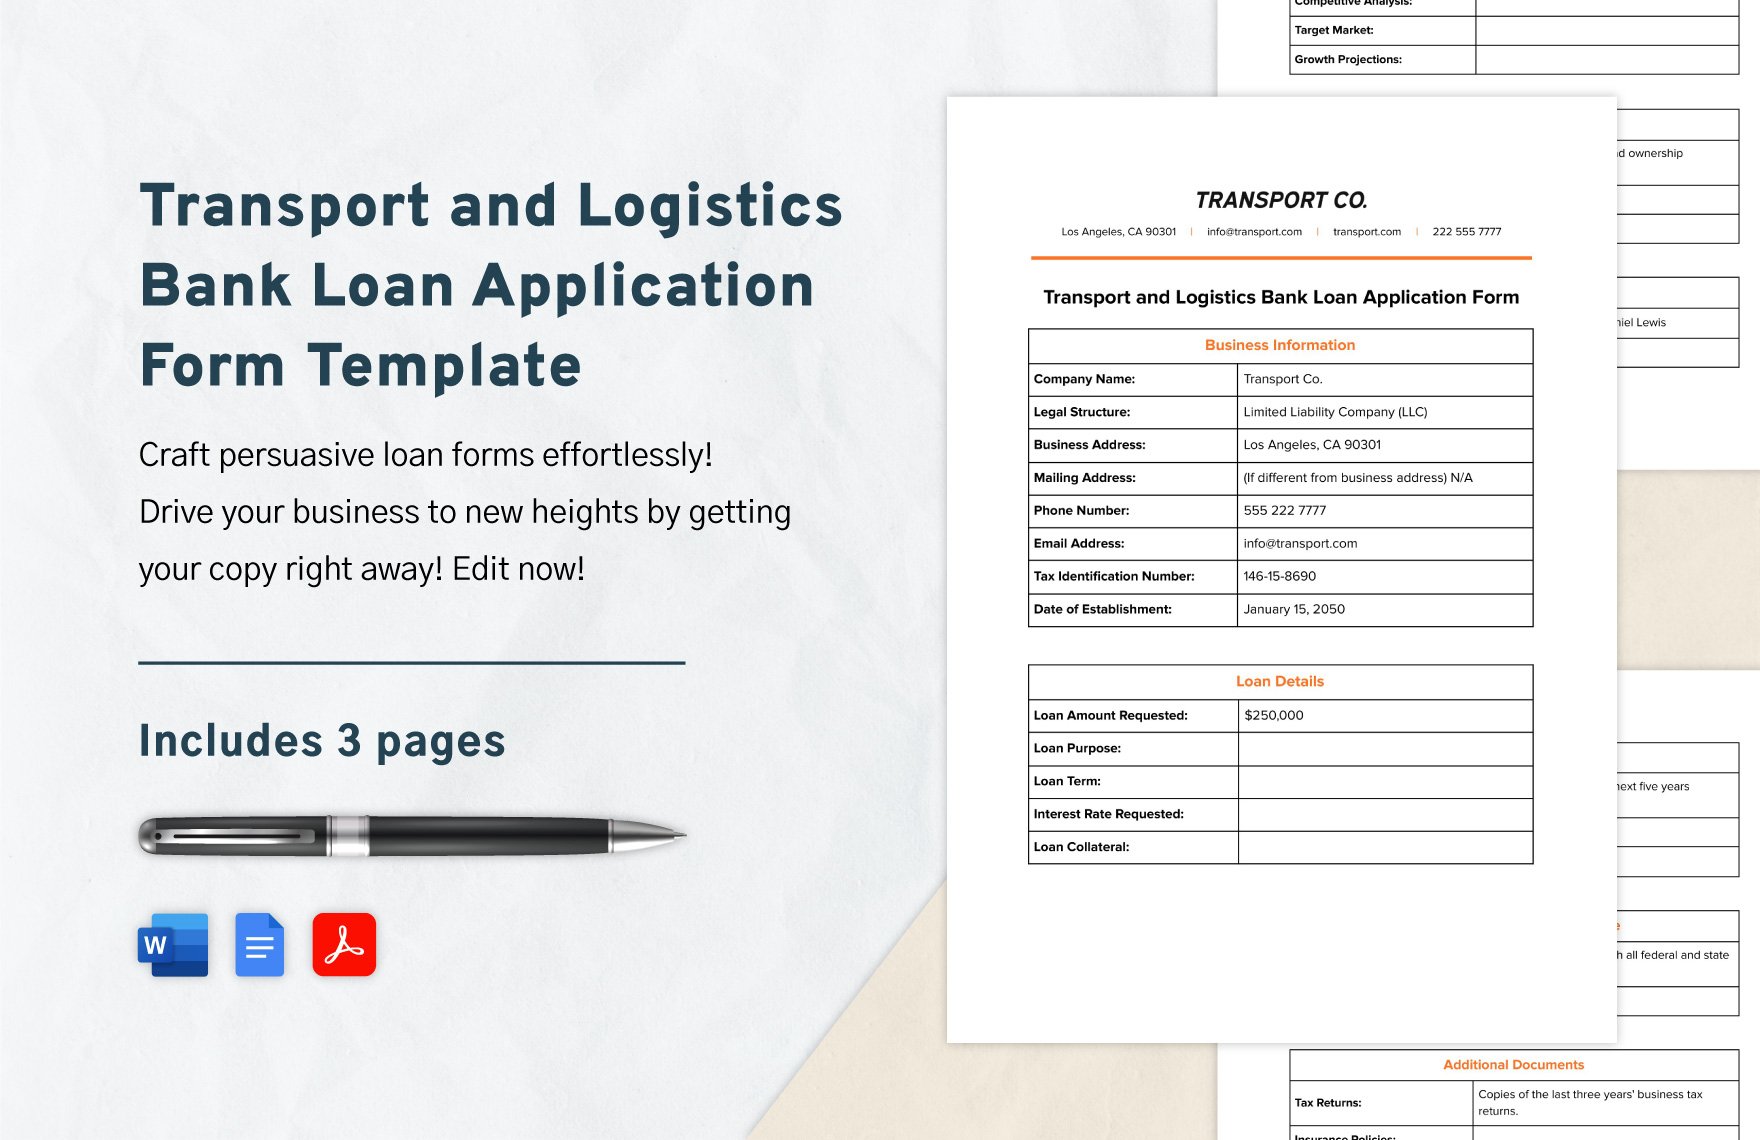 Transport and Logistics Bank Loan Application Form Template in Word, Google Docs, PDF